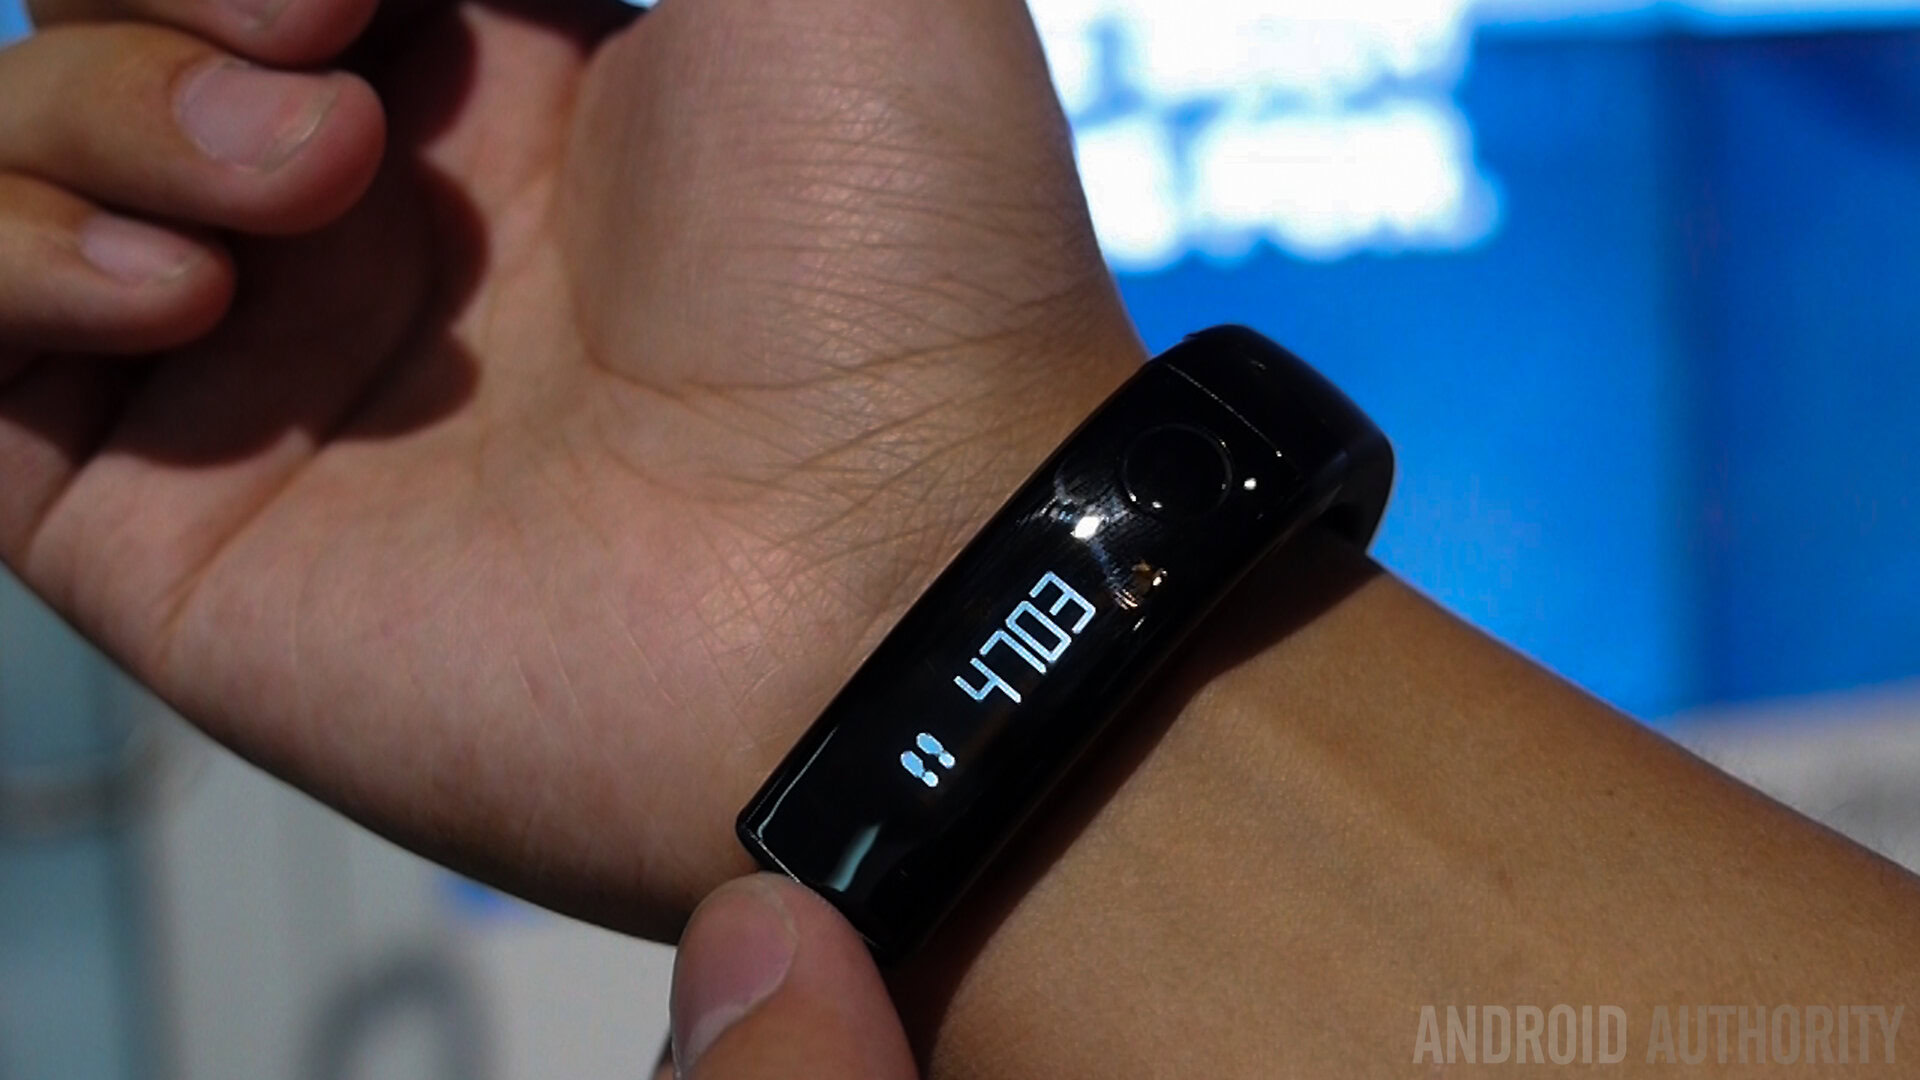 Best Android Accessory LG Lifeband CES 2014 Android Authority-7